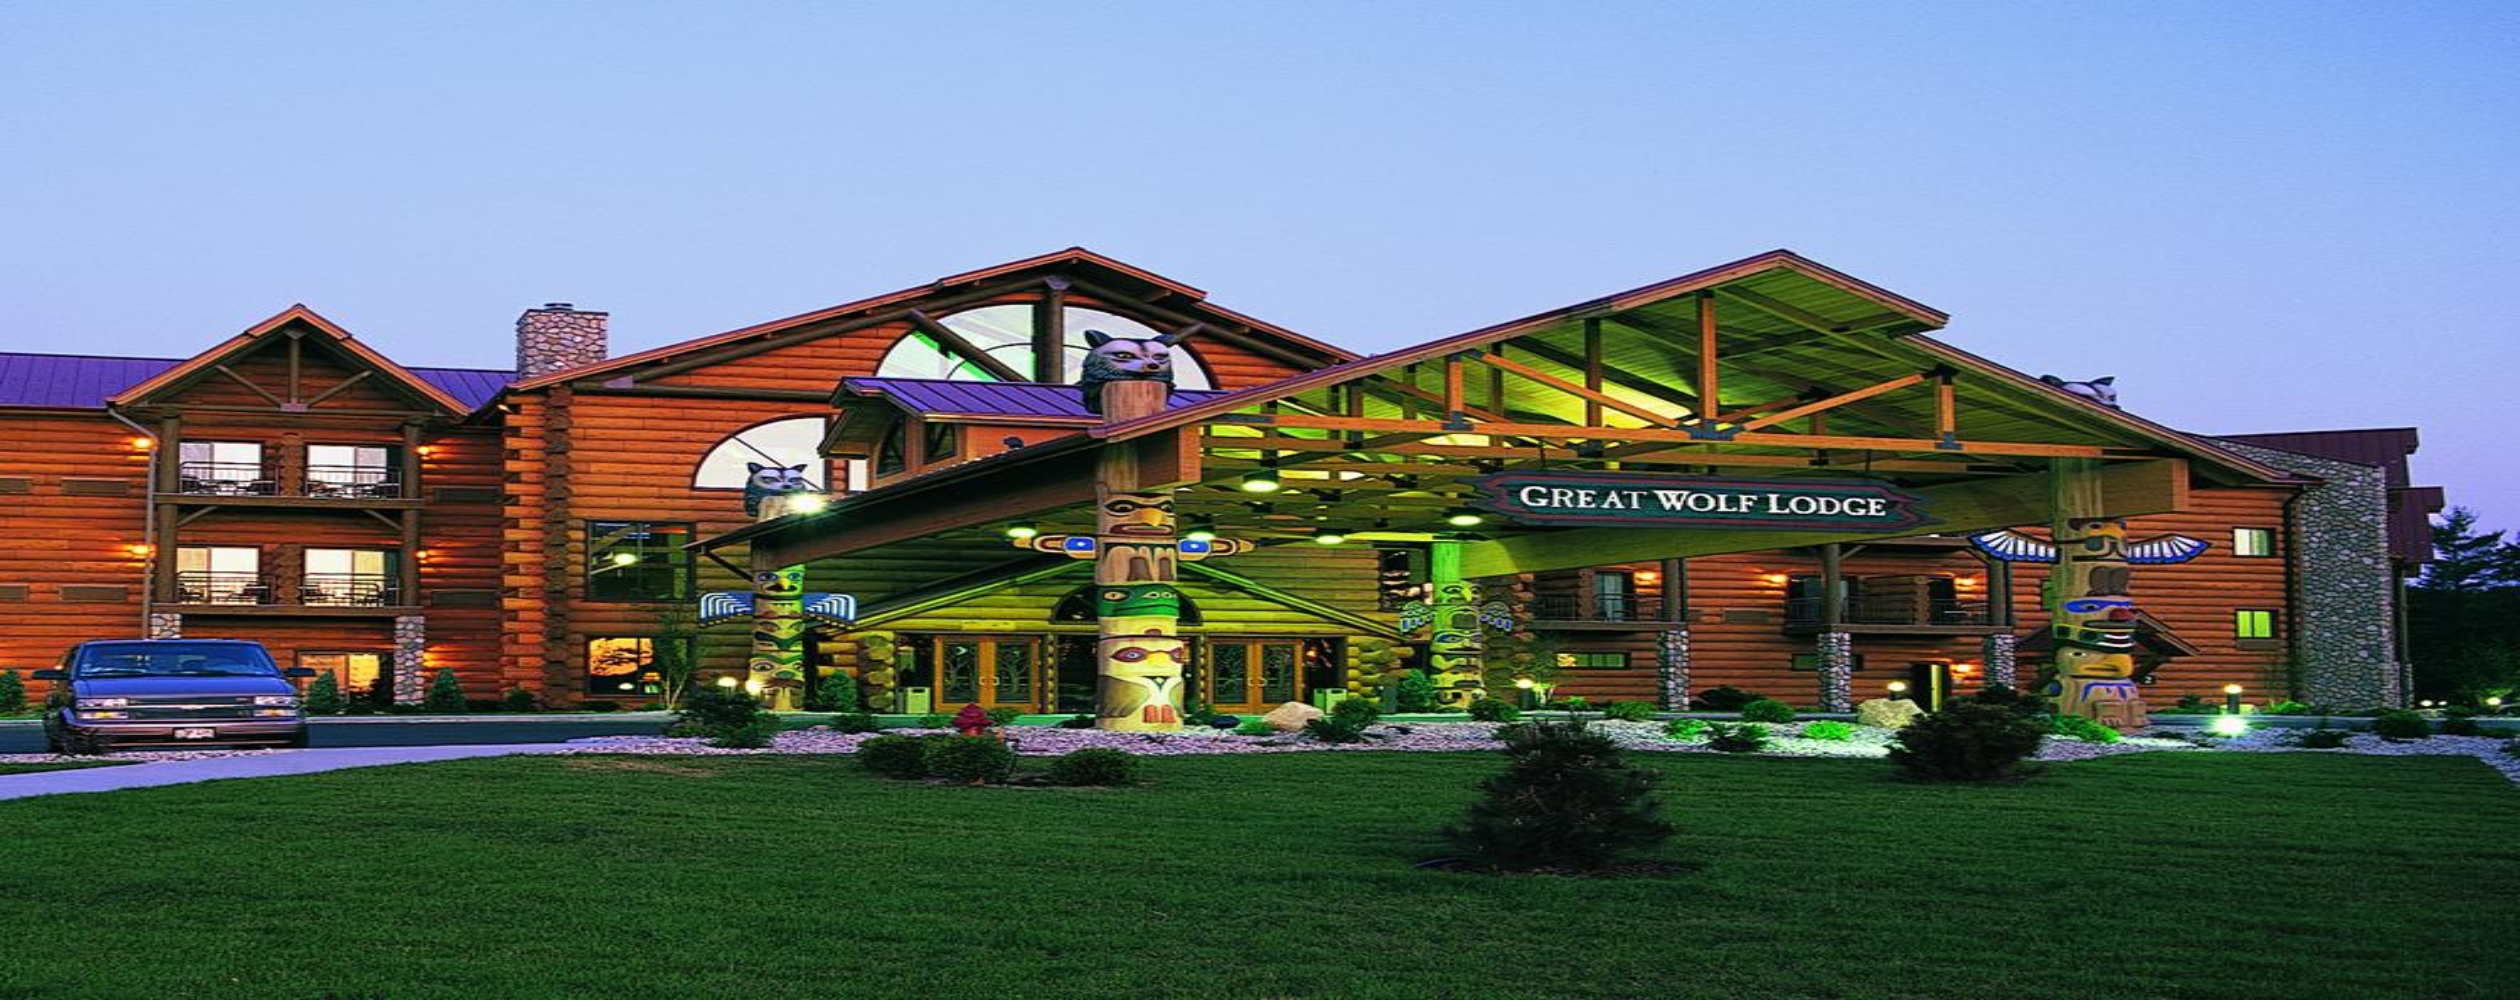 elements spa great wolf lodge wisconsin dells